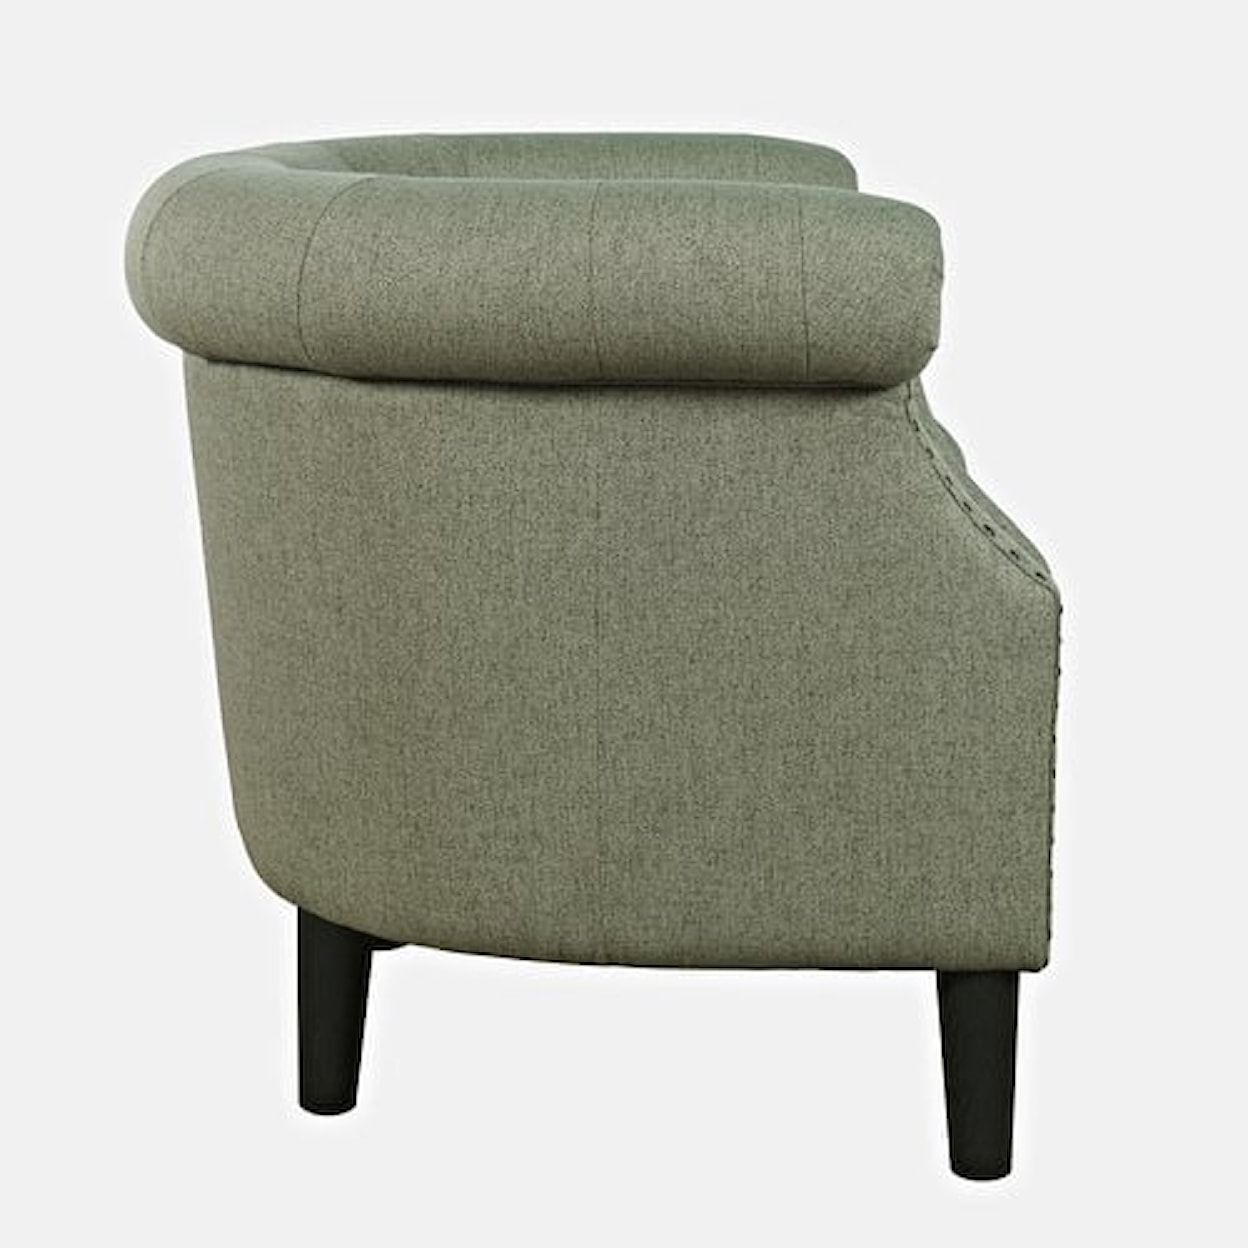 Jofran Lily Accent Chair - Sage